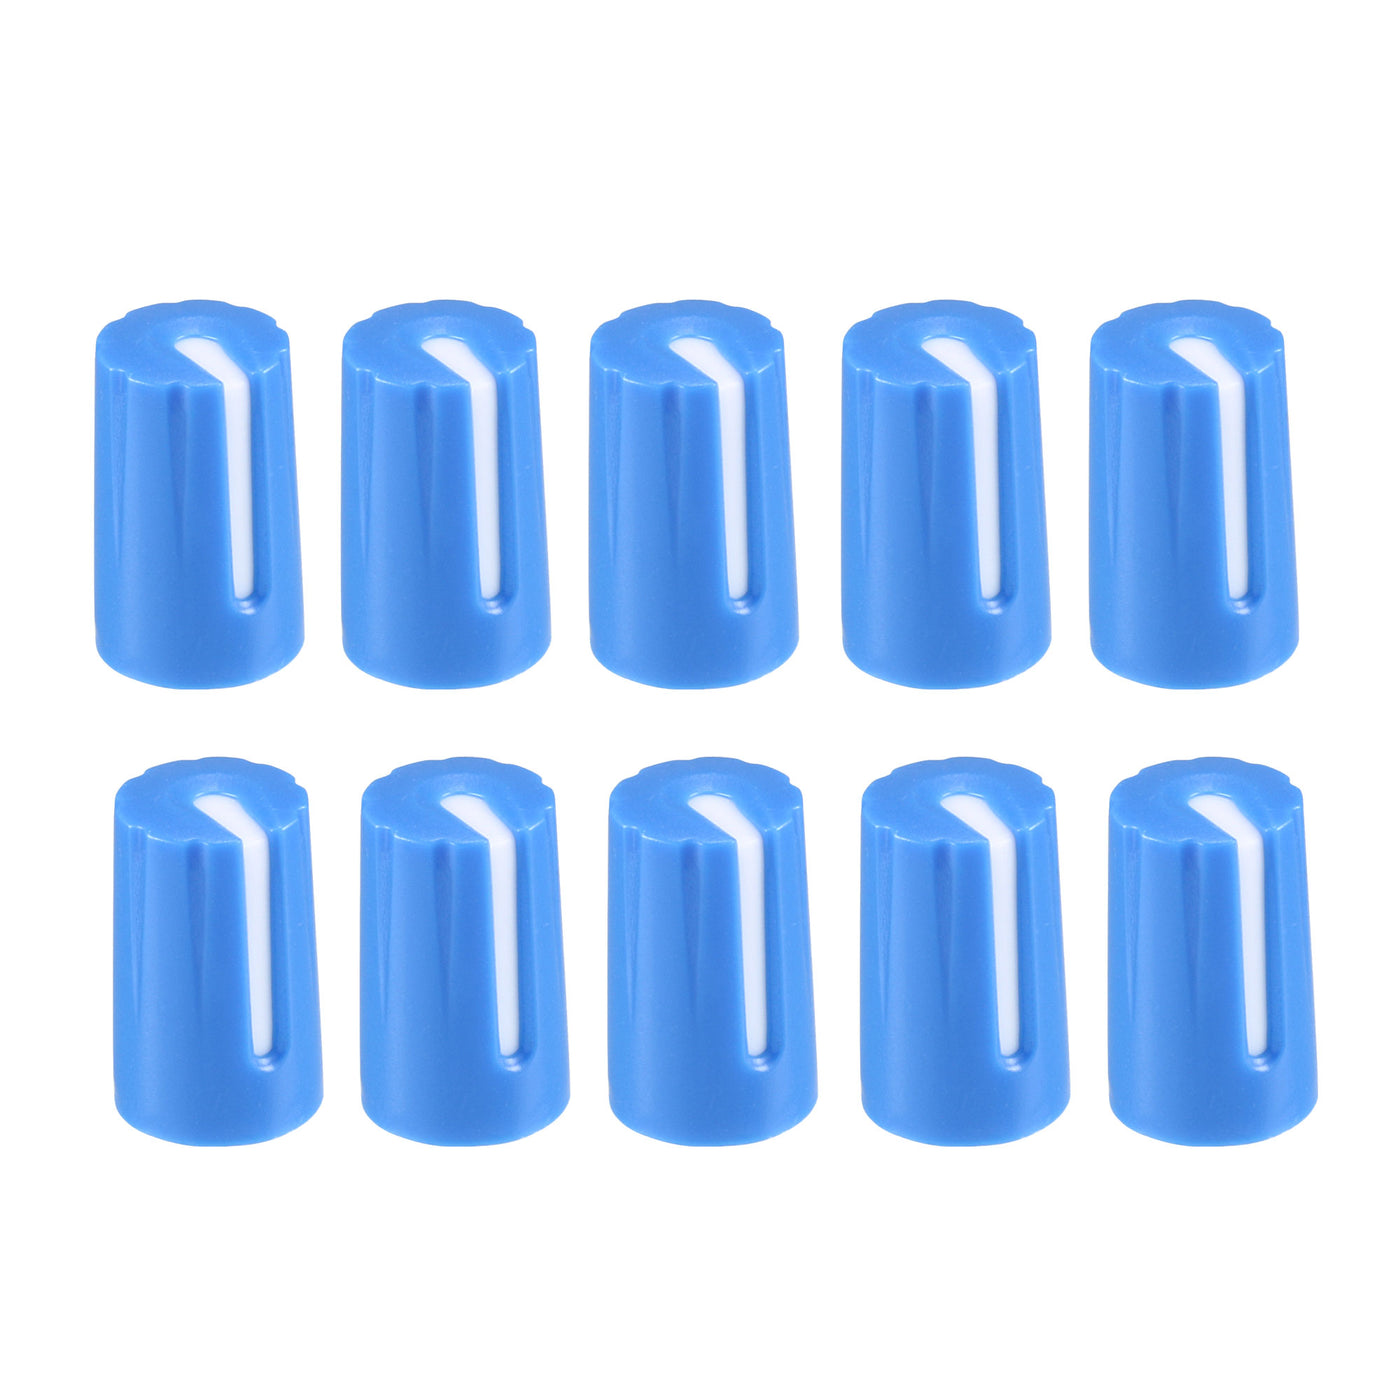 uxcell Uxcell 10pcs, 6mm Potentiometer Control Knobs For Electric Guitar Acrylic Volume Tone Knobs Blue White